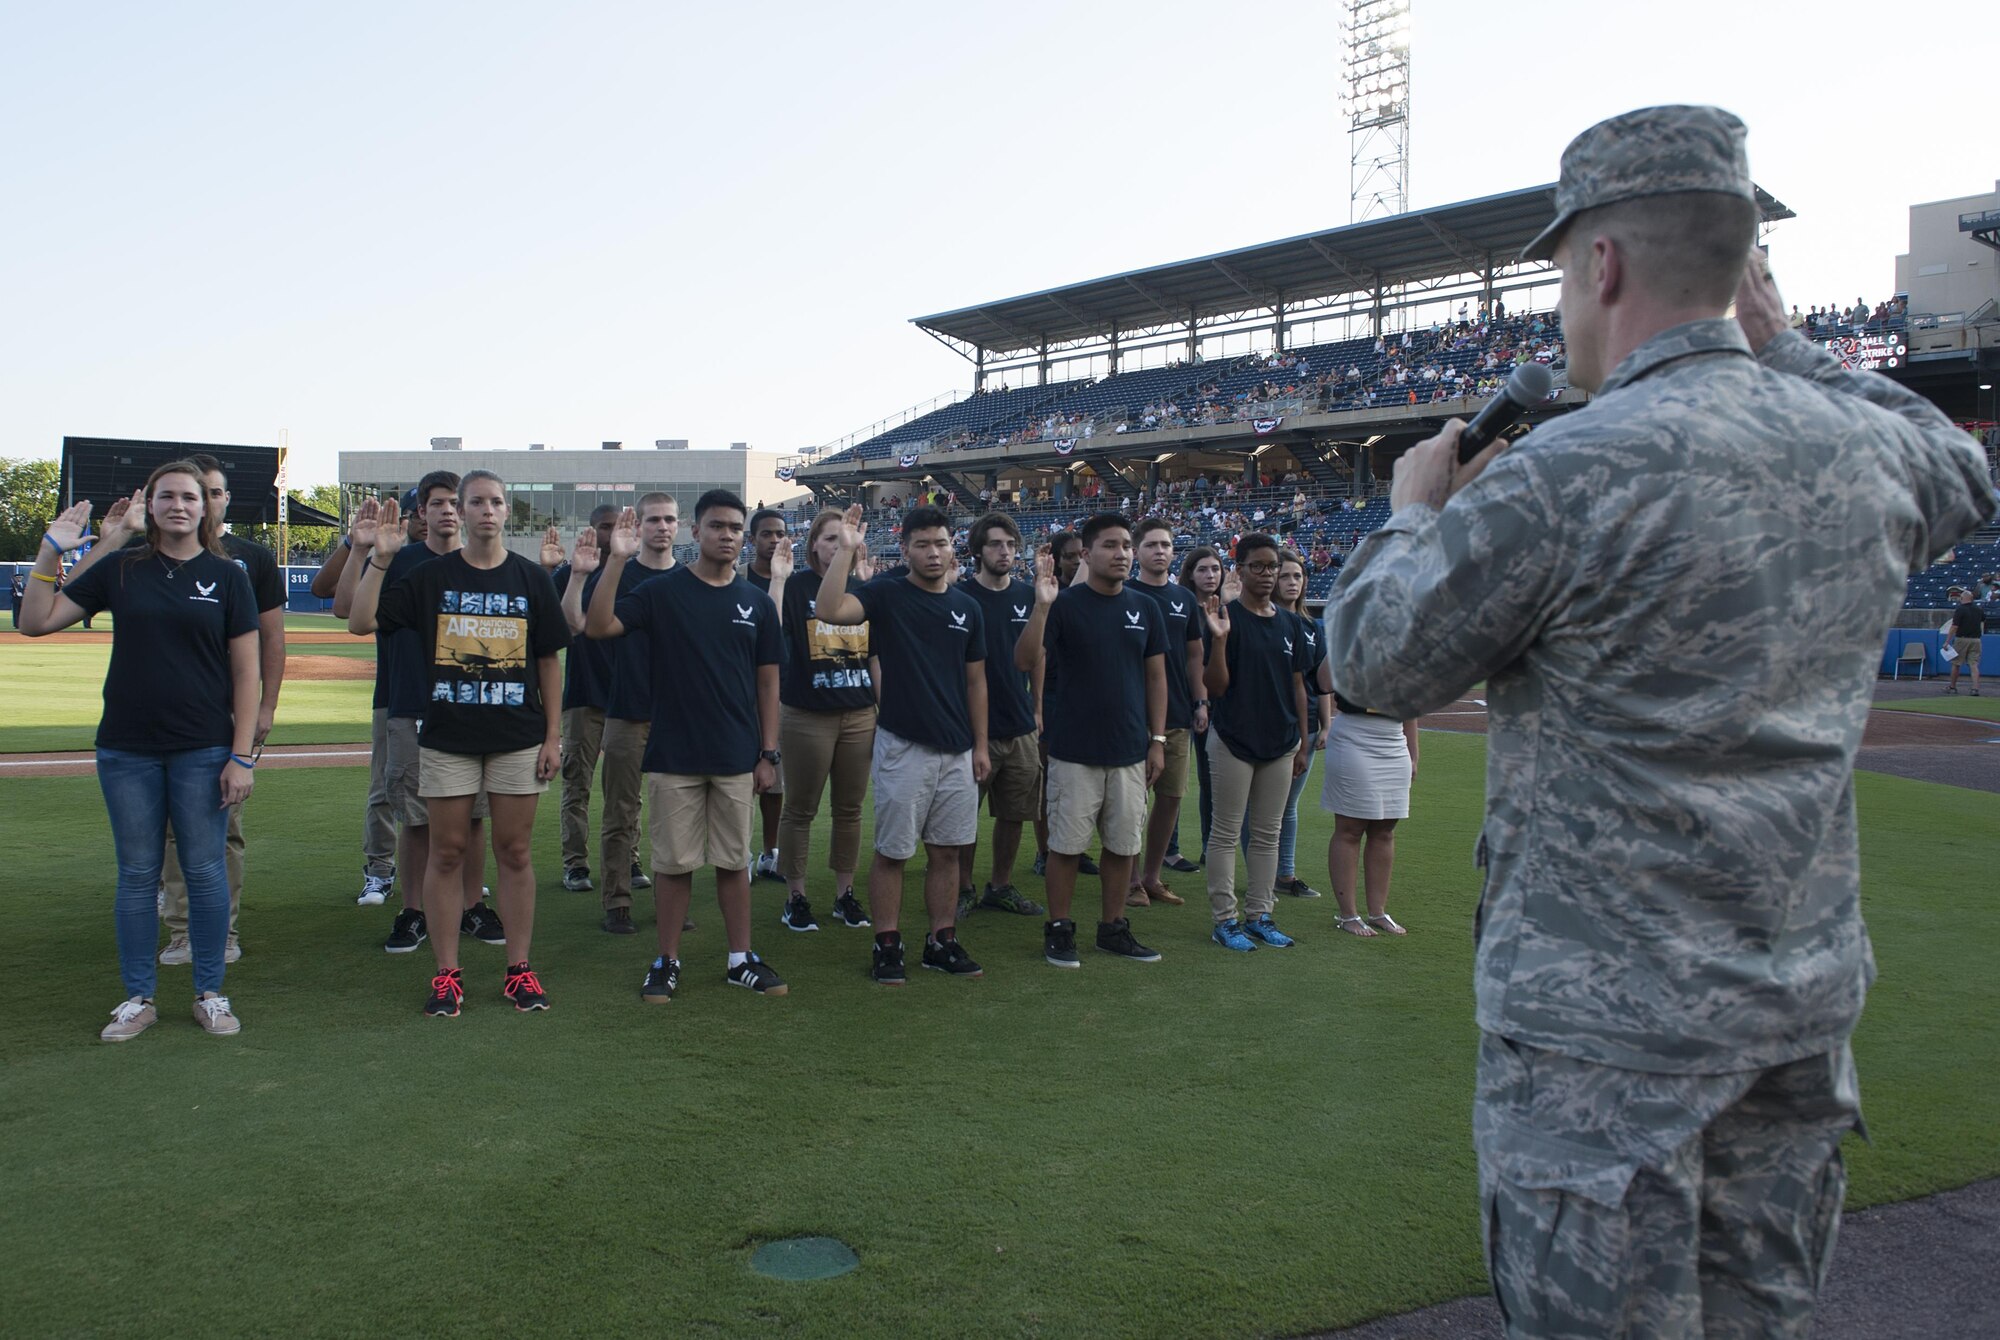 U.S. Air Force Col. Jason Brown, 480th Intelligence, Surveillance and Reconnaissance Wing commander, issues the oath of enlistment to Air Force Delayed Entry Program participants at the Norfolk Tides Air Force Appreciation Night baseball game in Norfolk, Va., July 23, 2016. The event included a presentation of colors by the Langley Air Force Base honor guard and music by the Air Combat Command Heritage of America Band. (U.S. Air Force photo by Airman 1st Class Kaylee Dubois)